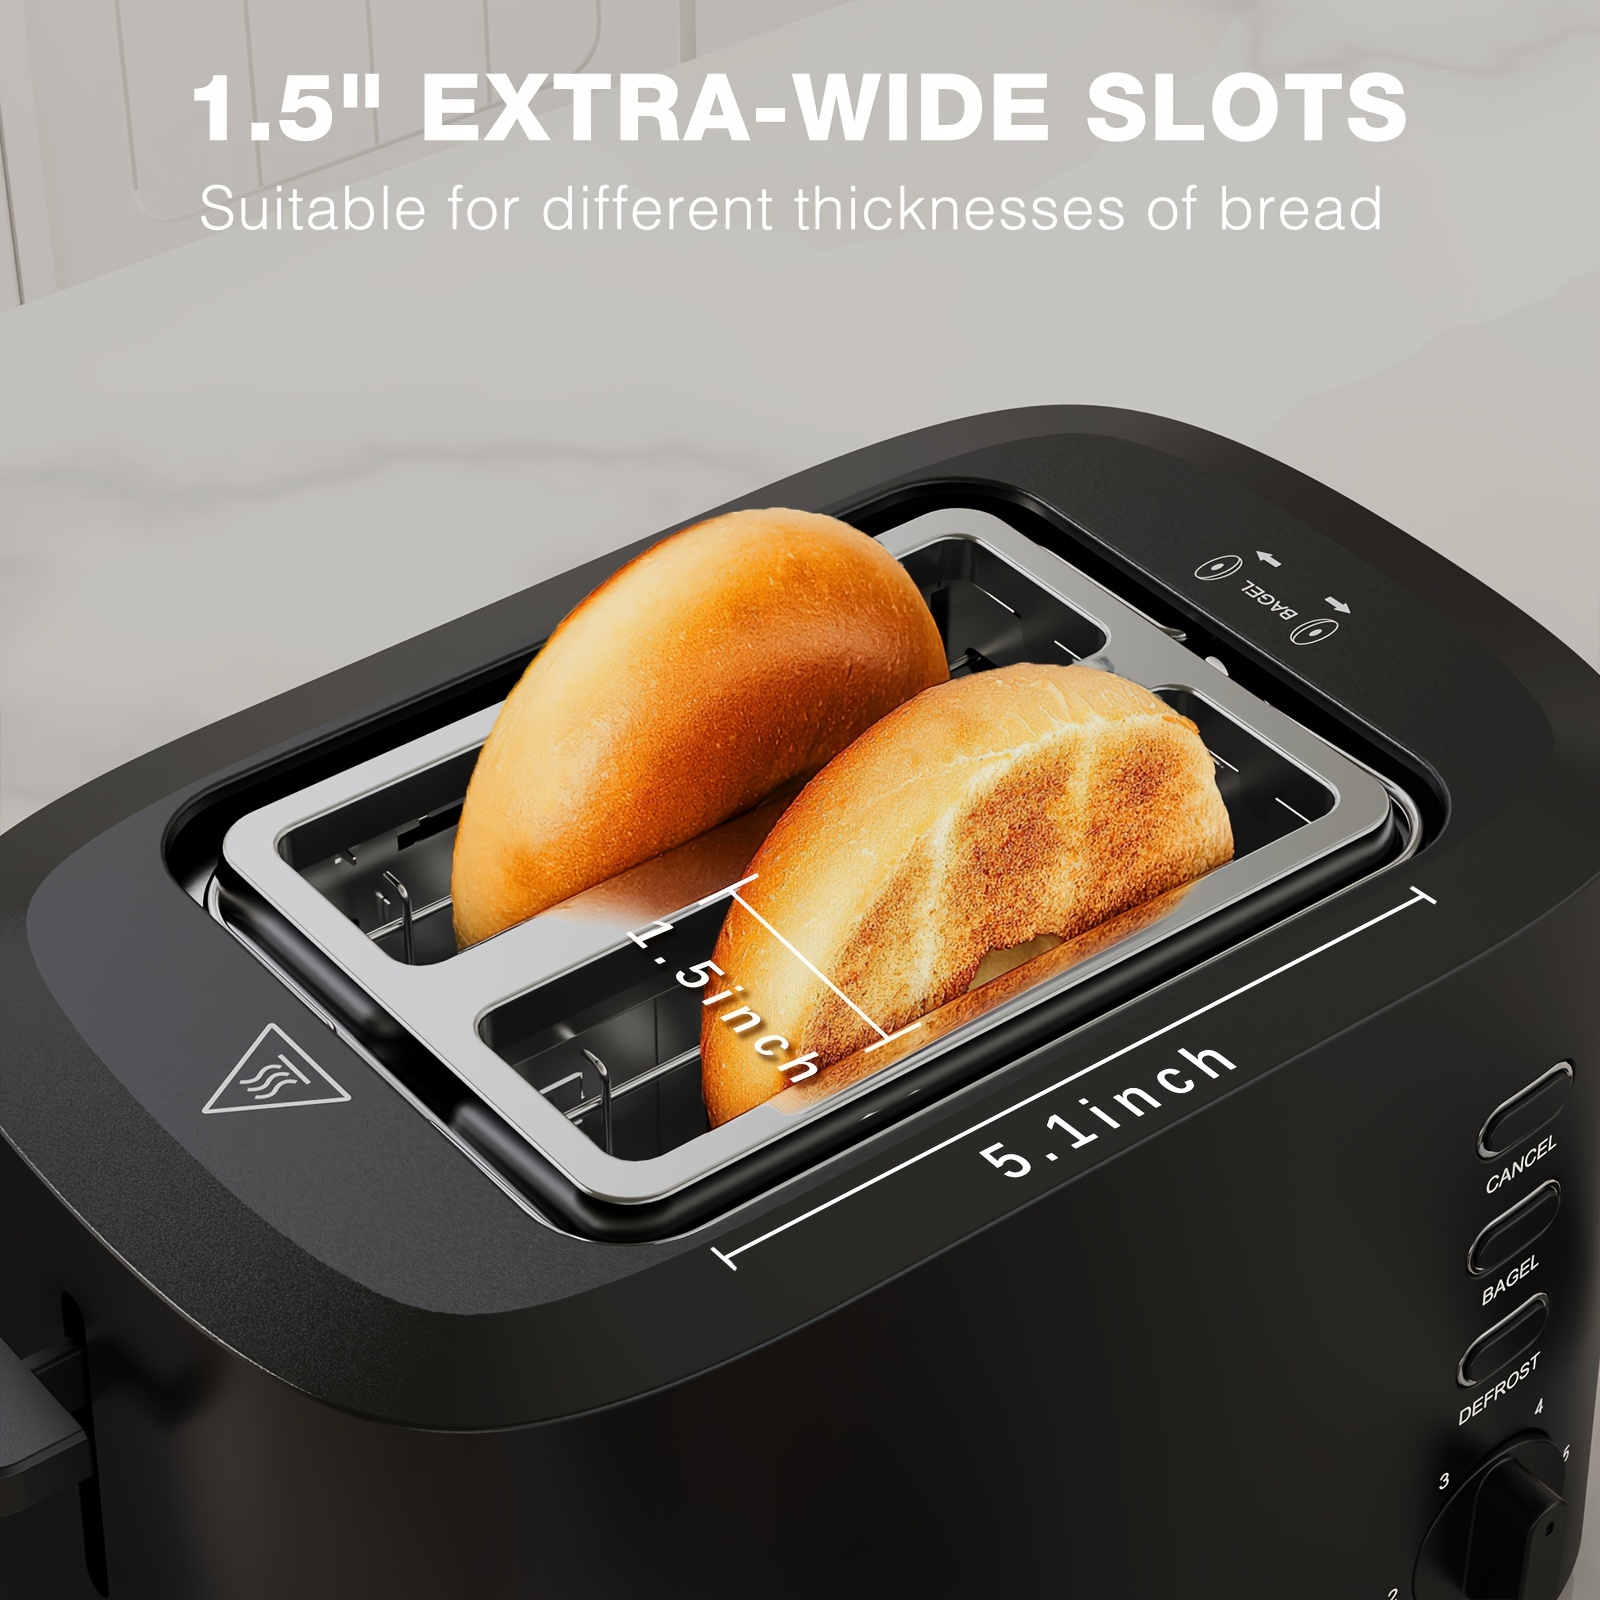 

Anfilank 2-slice Toaster, Extra Wide Slots, Built-in Warming Rack, Cancel, Bagel, Defrost, Easy Cleanup, High Lift Lever 900w